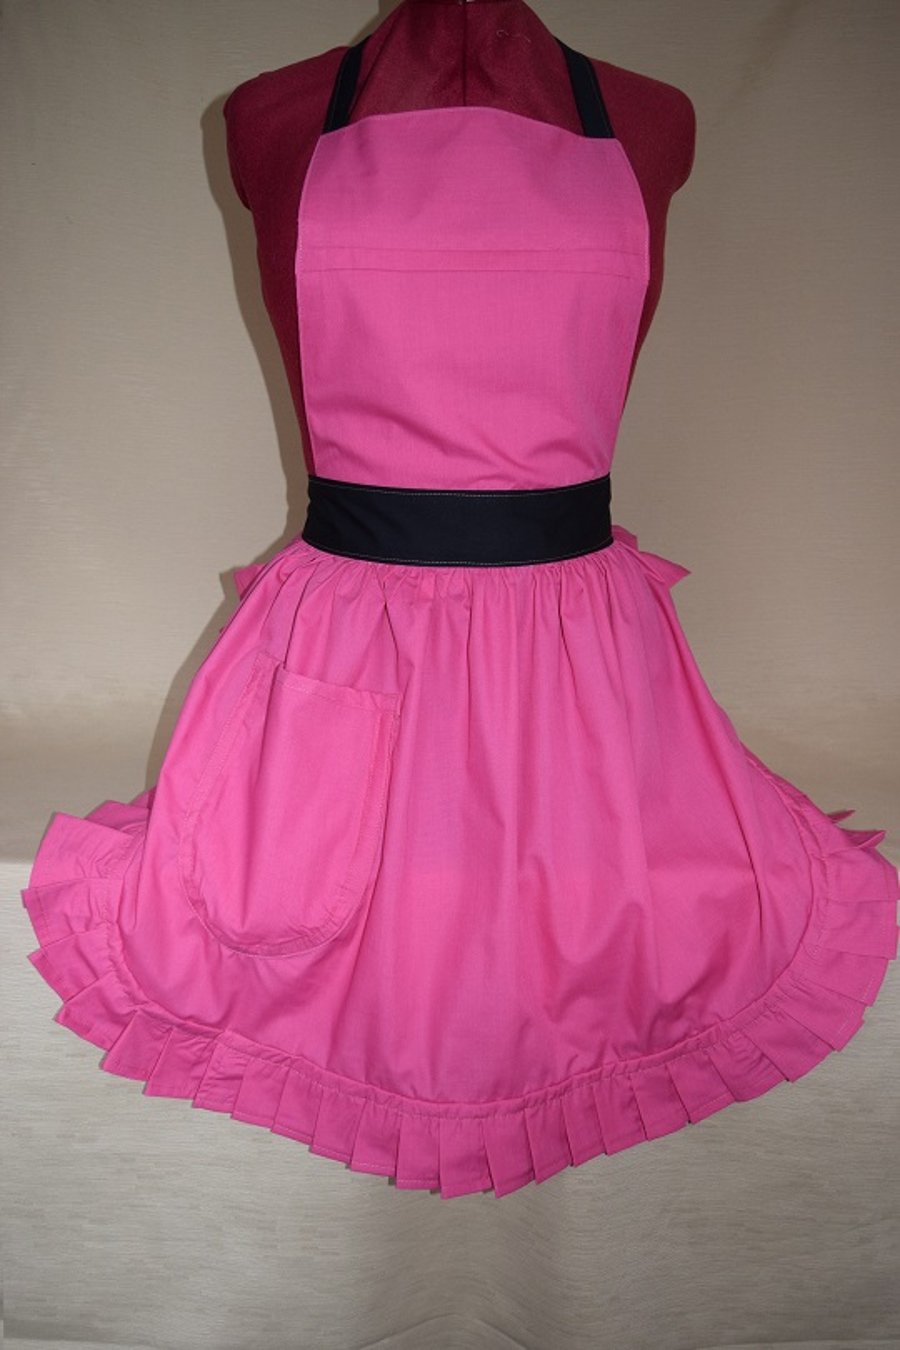 Vintage 50s Style Full Apron Pinny - Pink with Black Ties